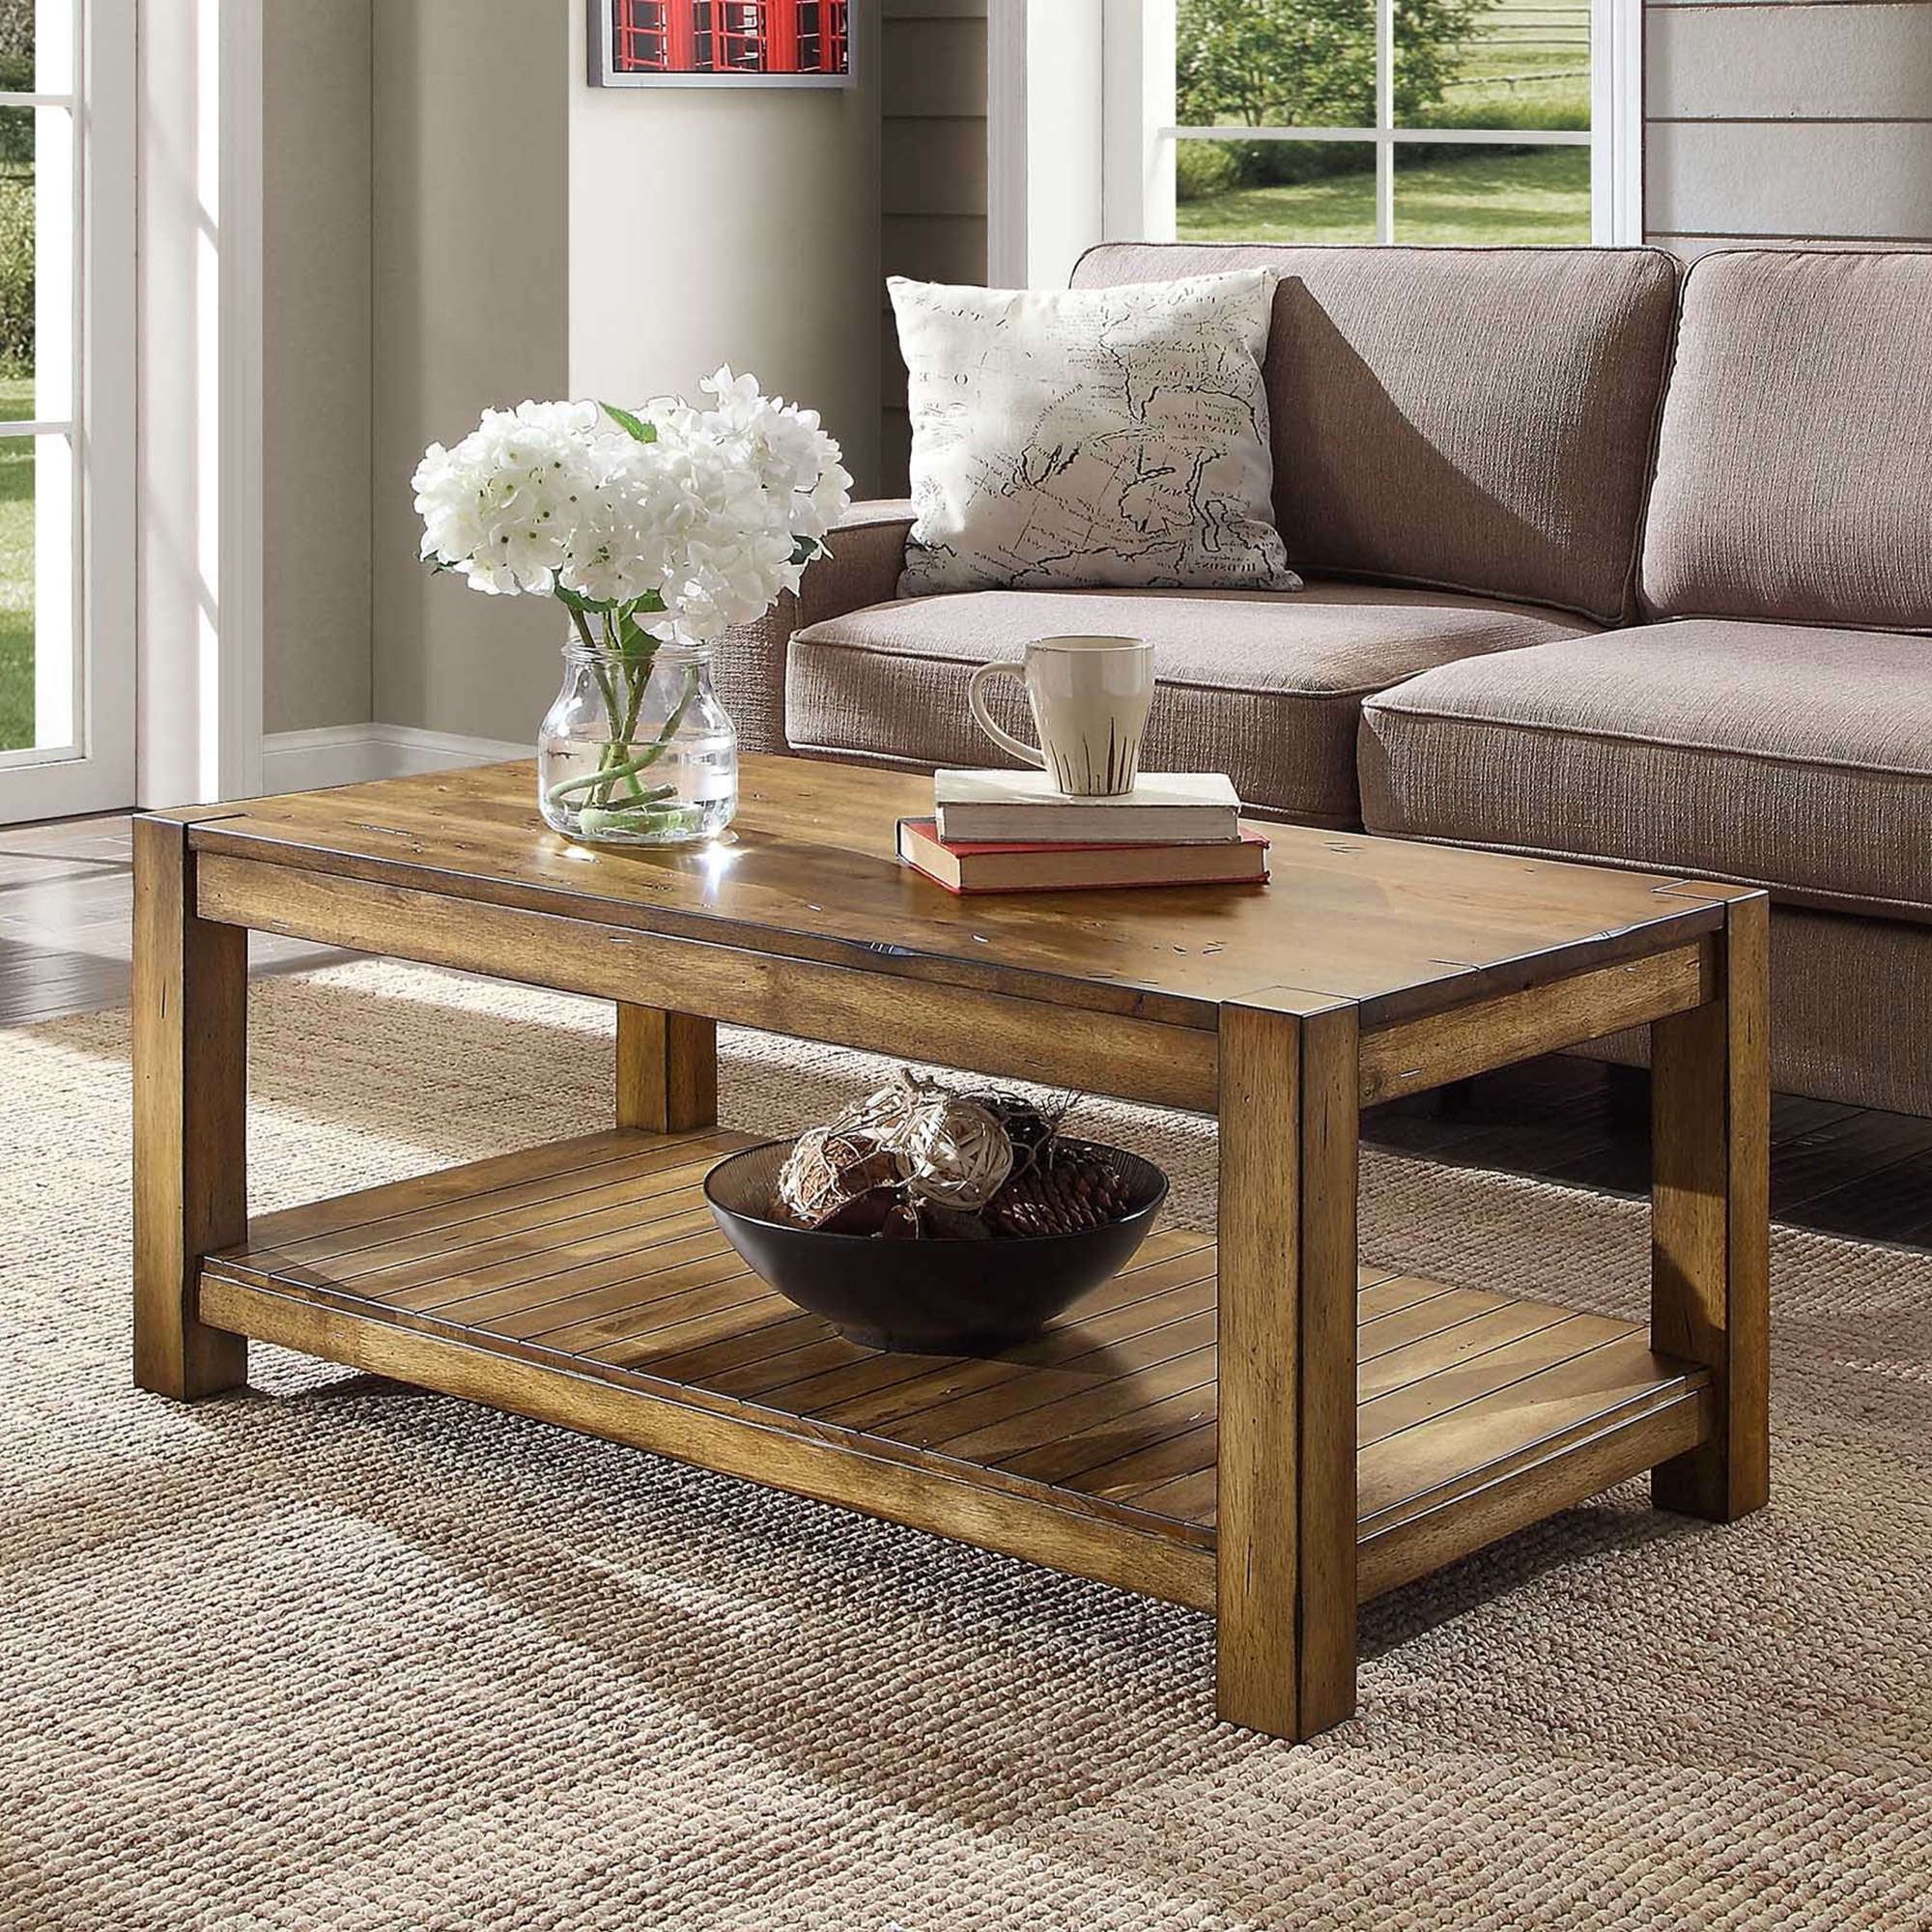 Bryant Solid Wood Coffee Table, Rustic Maple Brown Finish – Walmart Pertaining To Rustic Wood Coffee Tables (View 5 of 20)